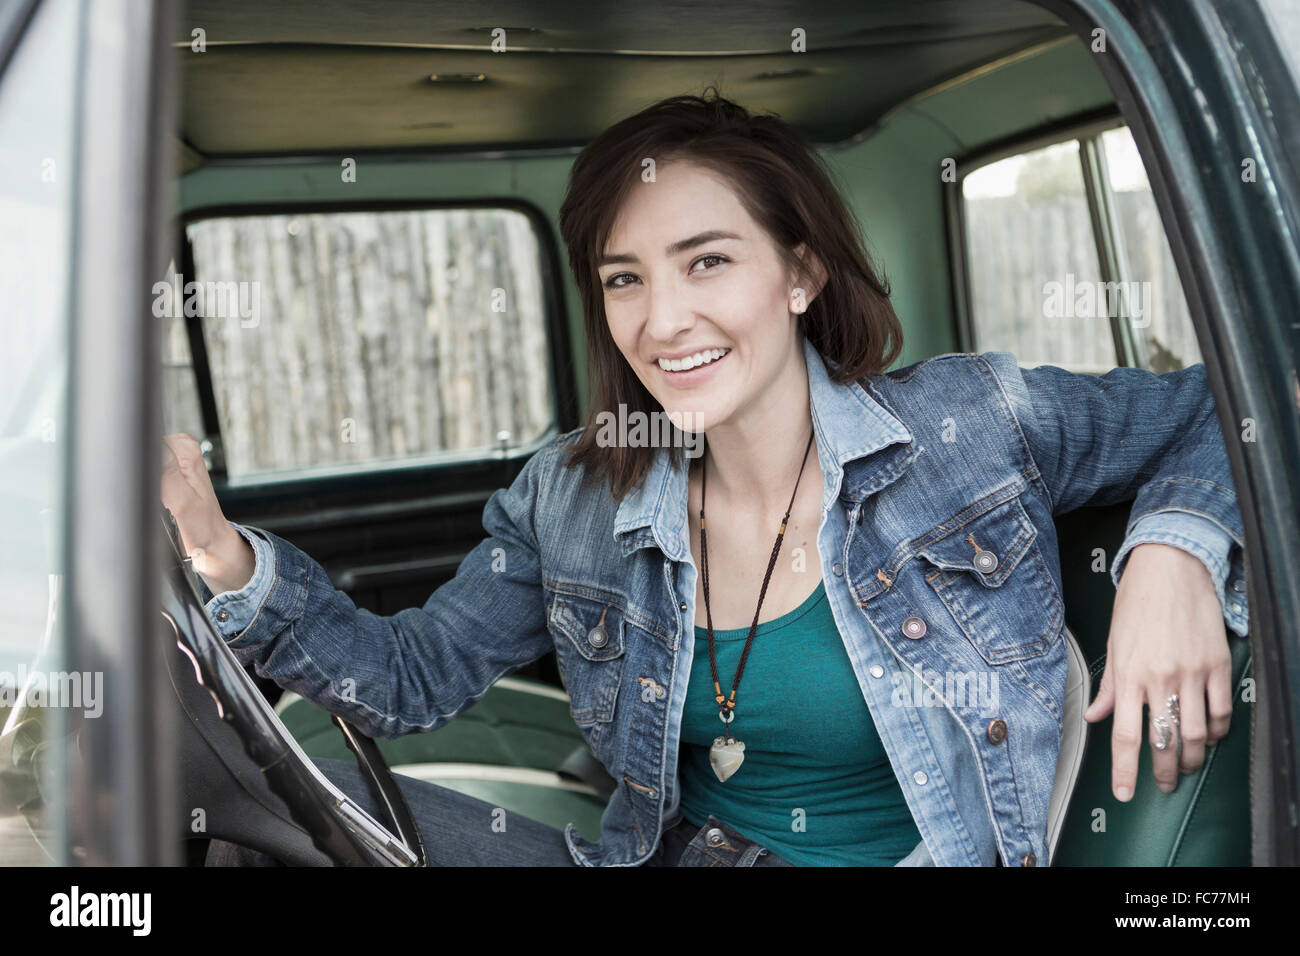 Hispanic woman sitting in truck Banque D'Images